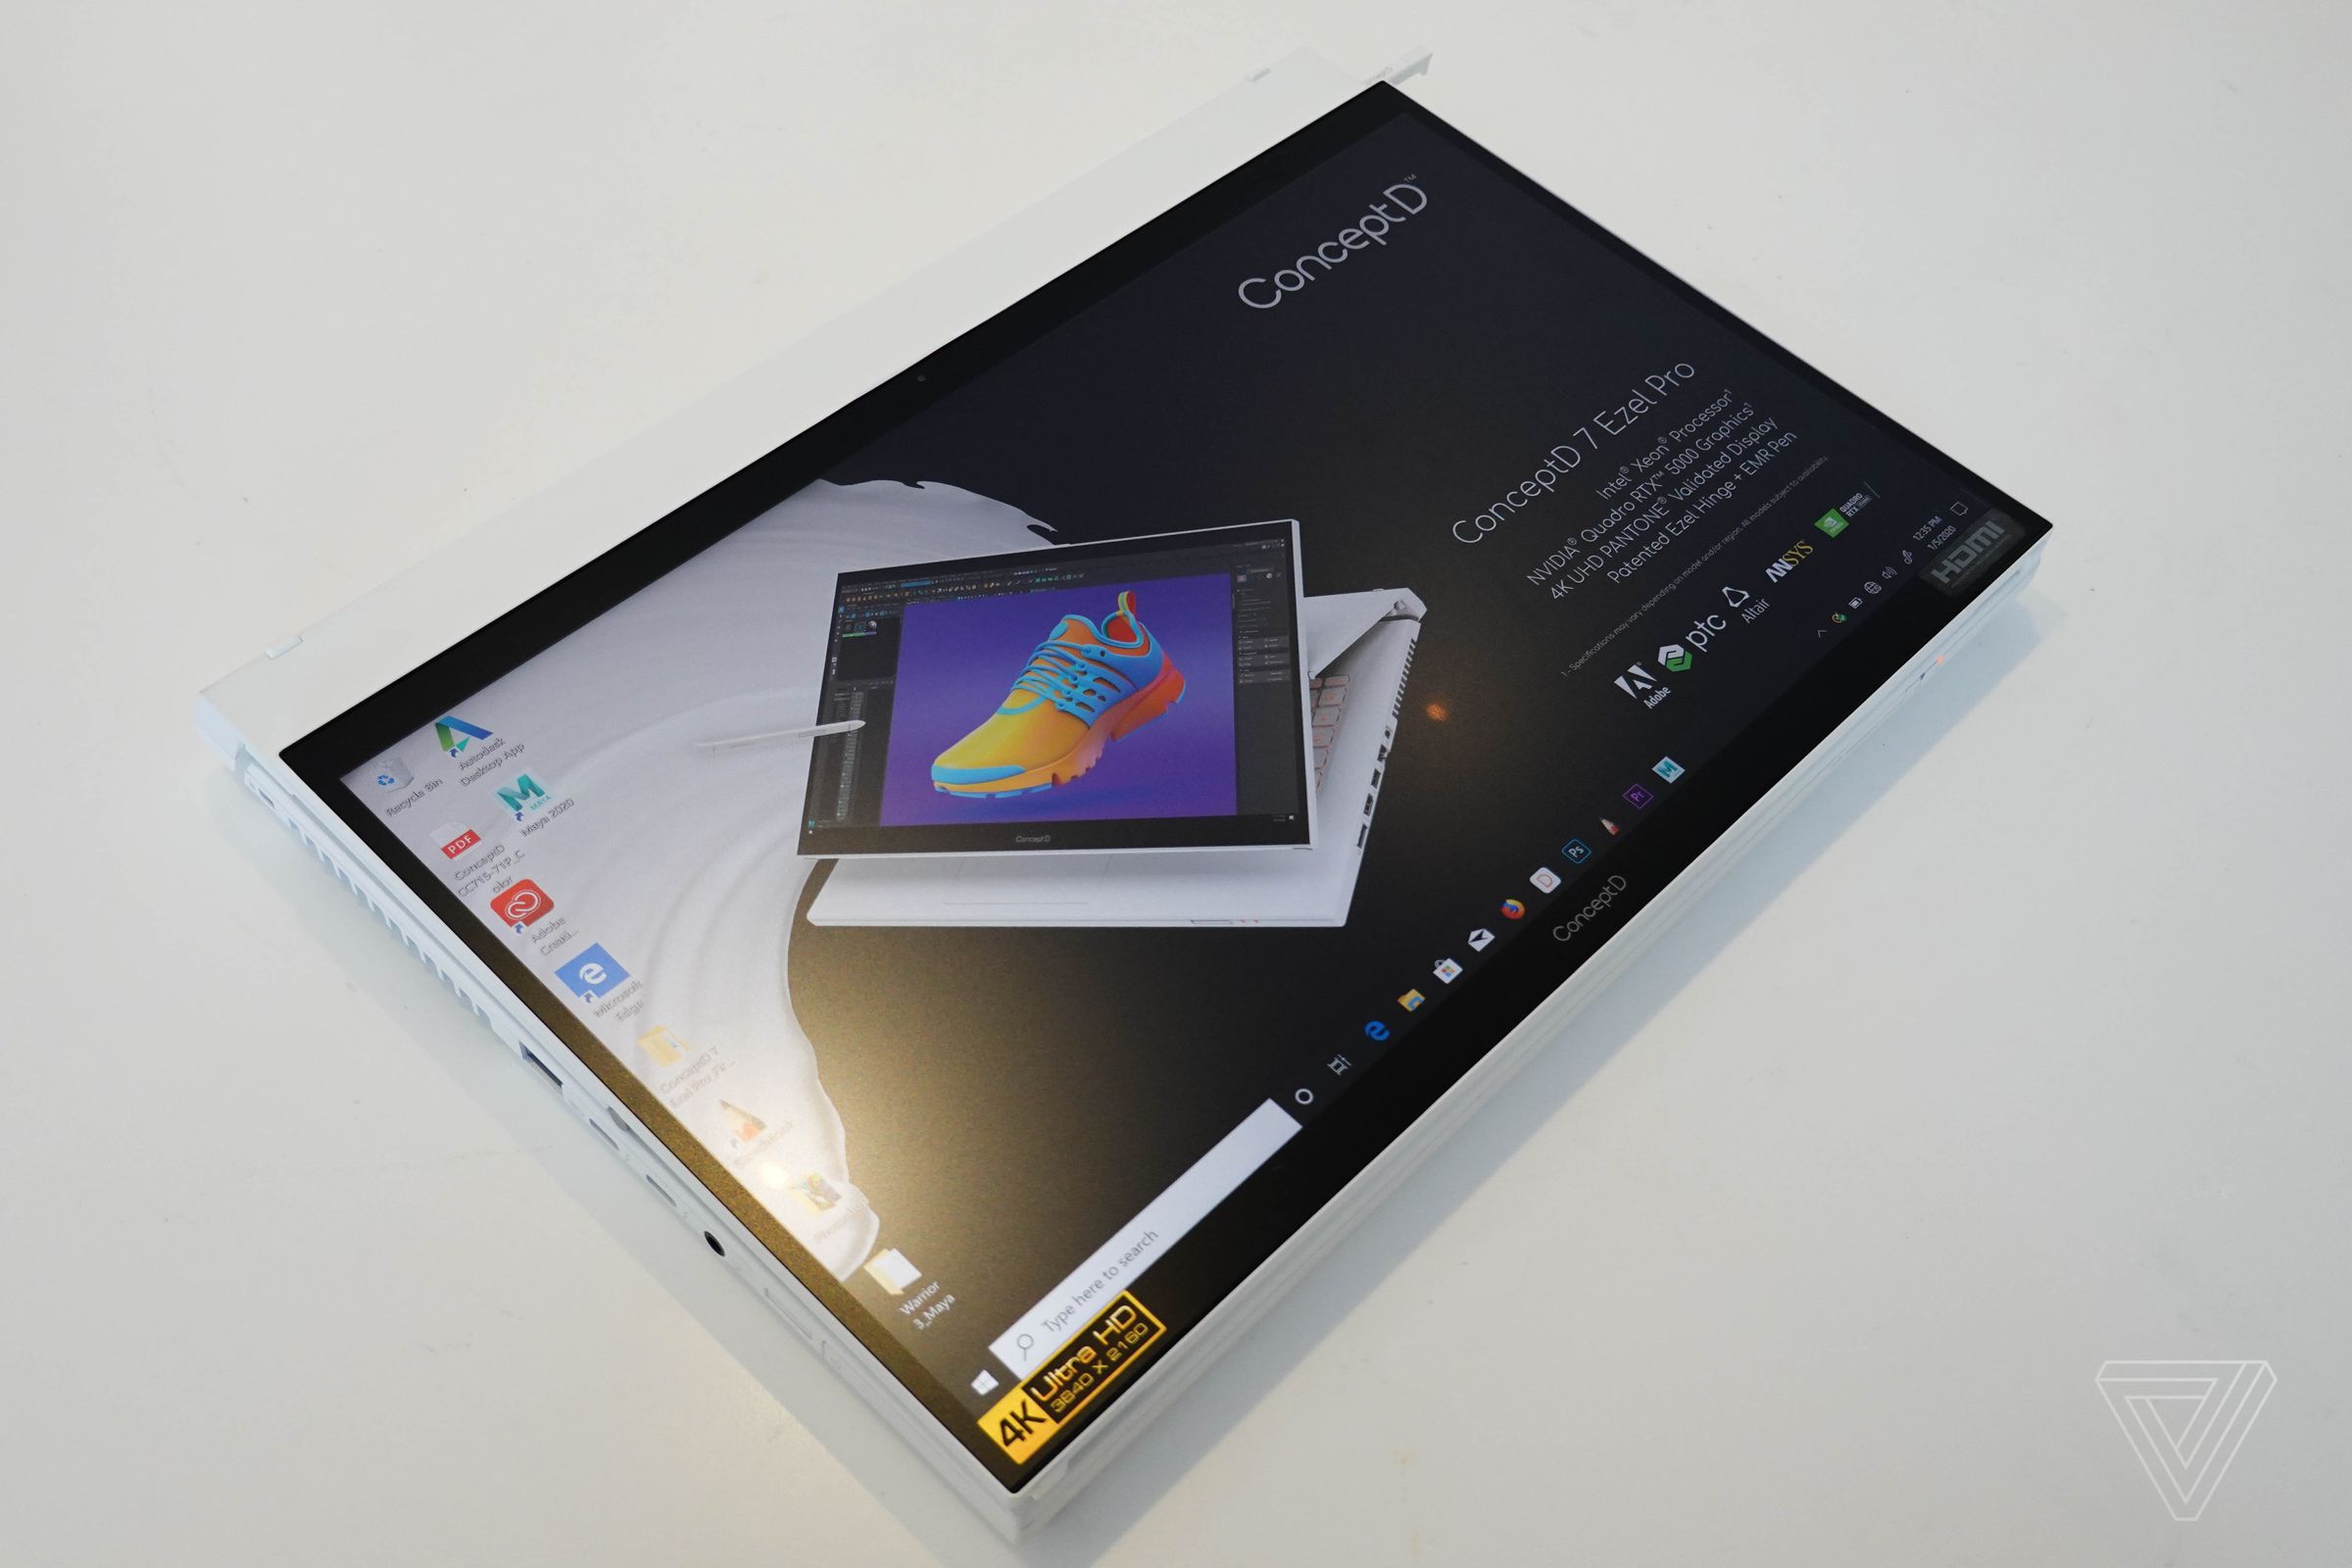 The laptop’s screen can be folded down to make it easier to draw on.